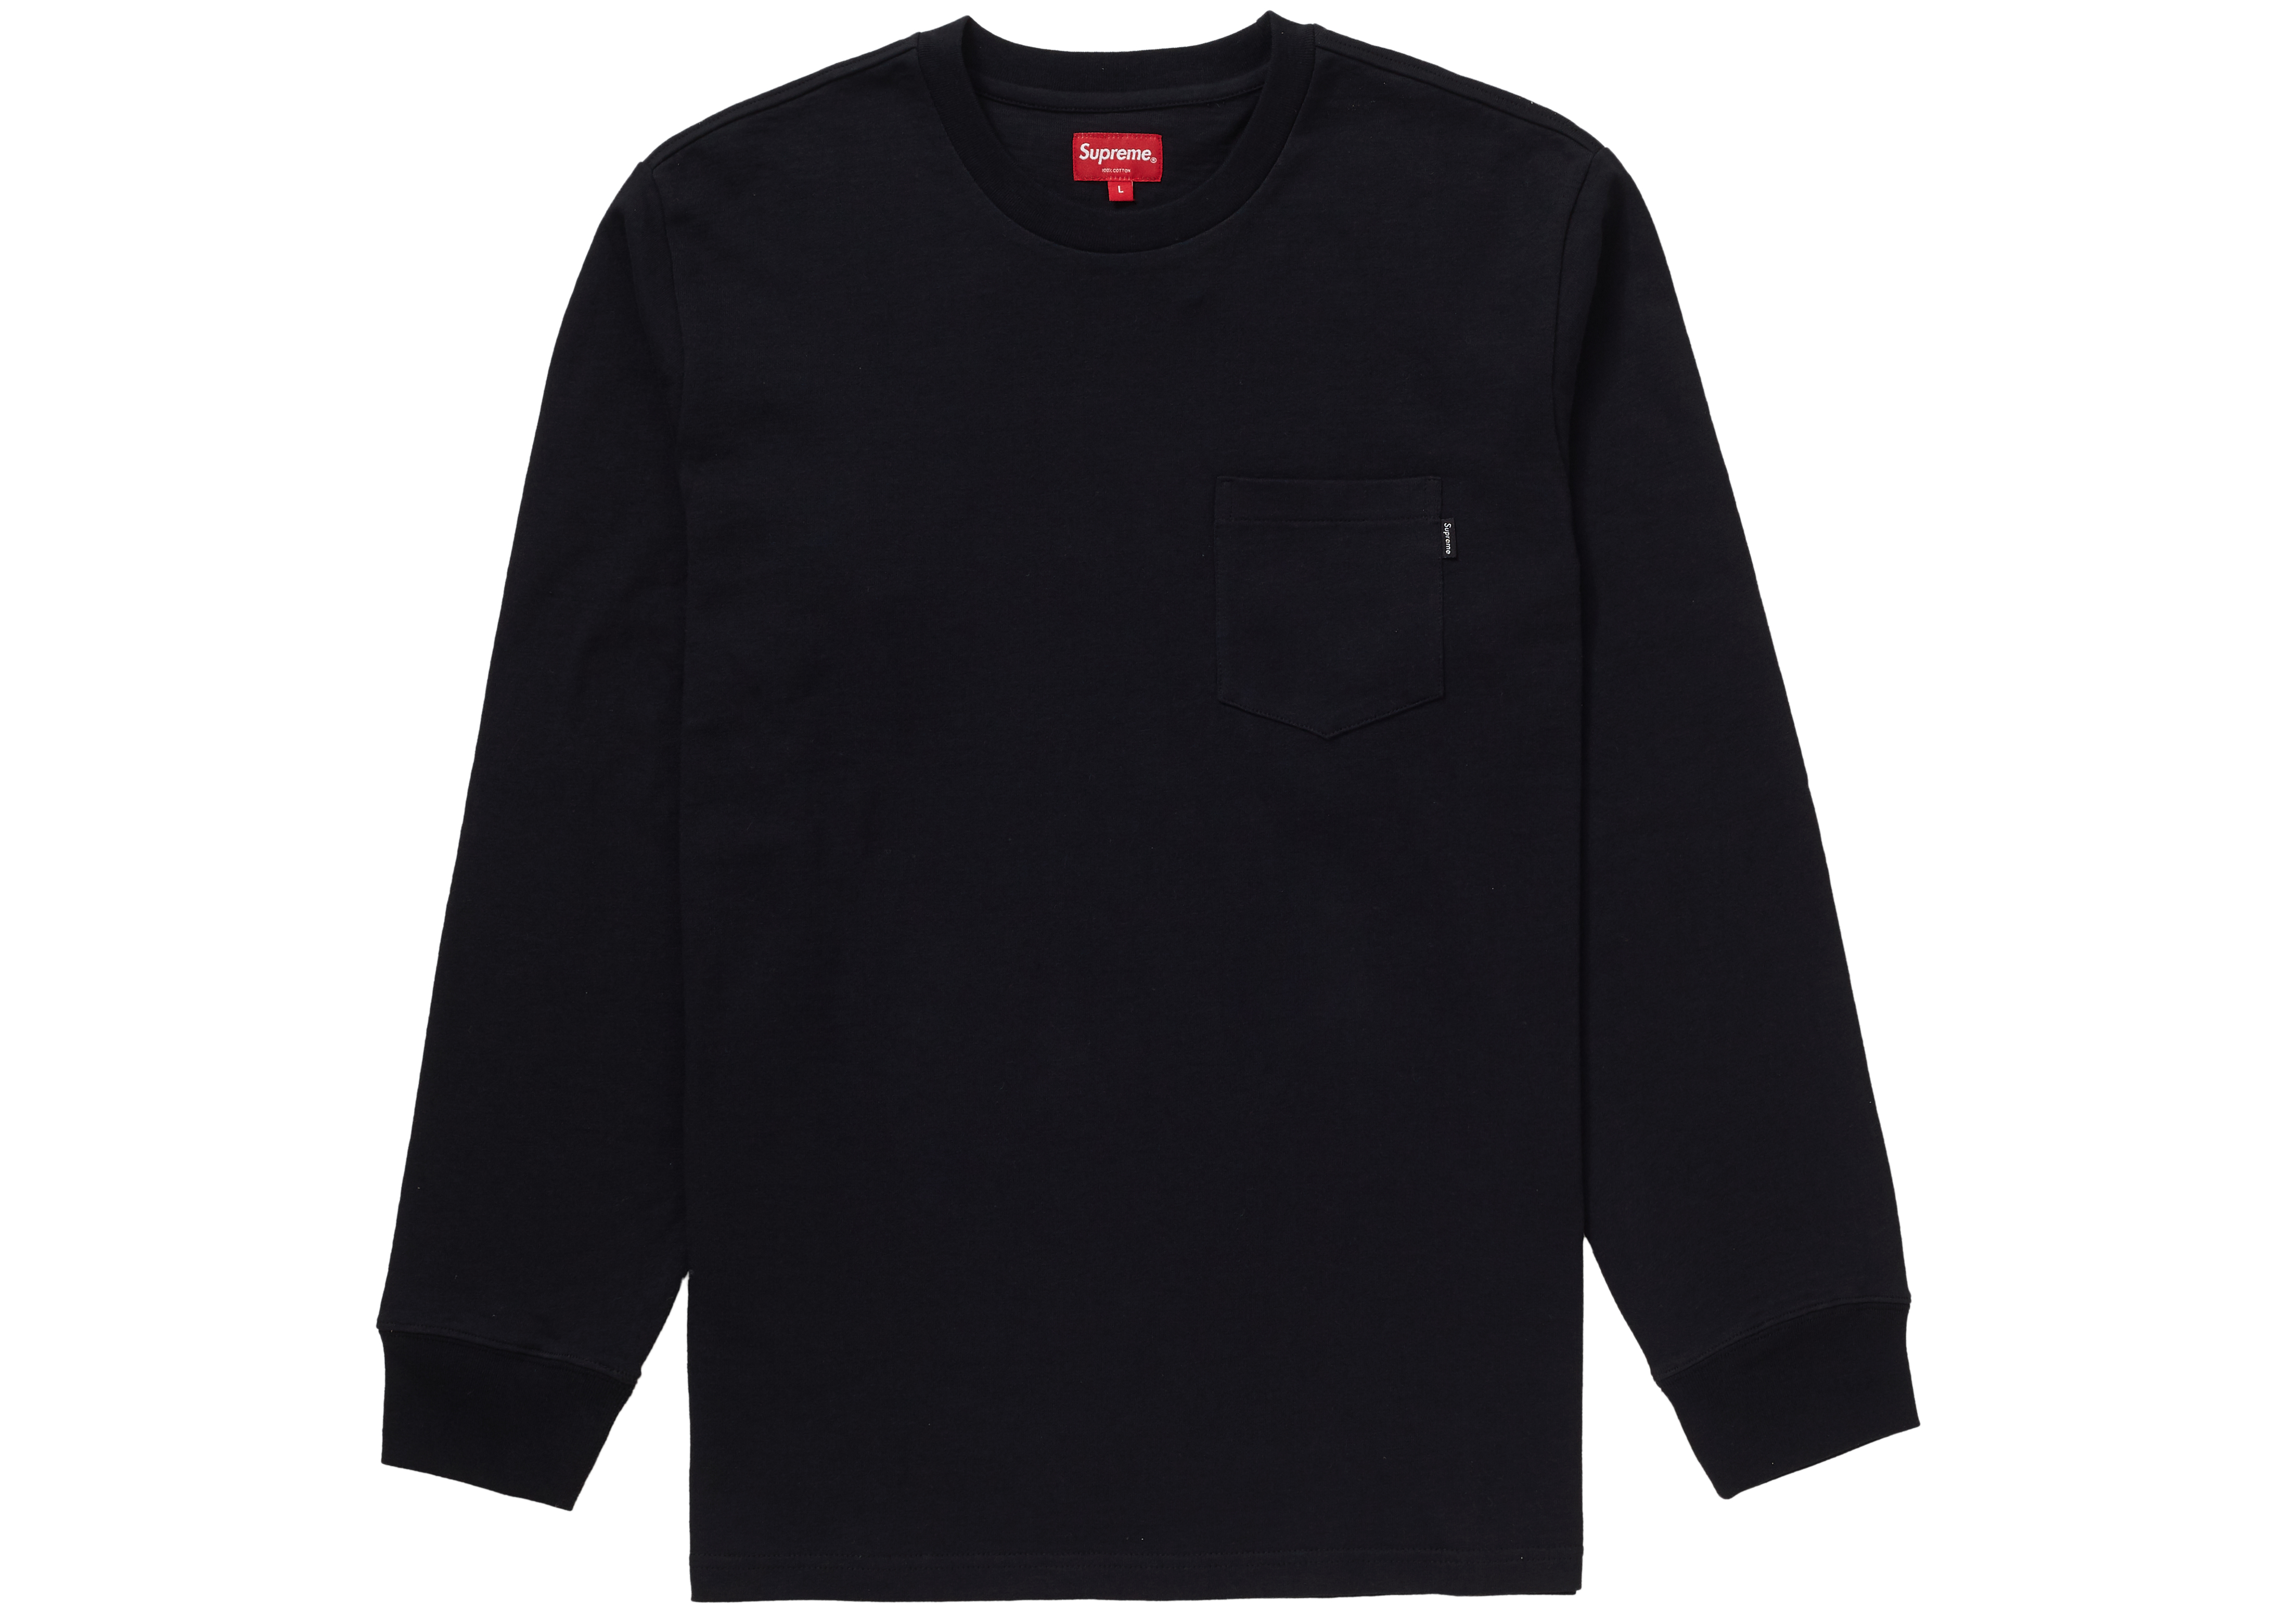 Buy Supreme Apparel: Tops, Outerwear & More